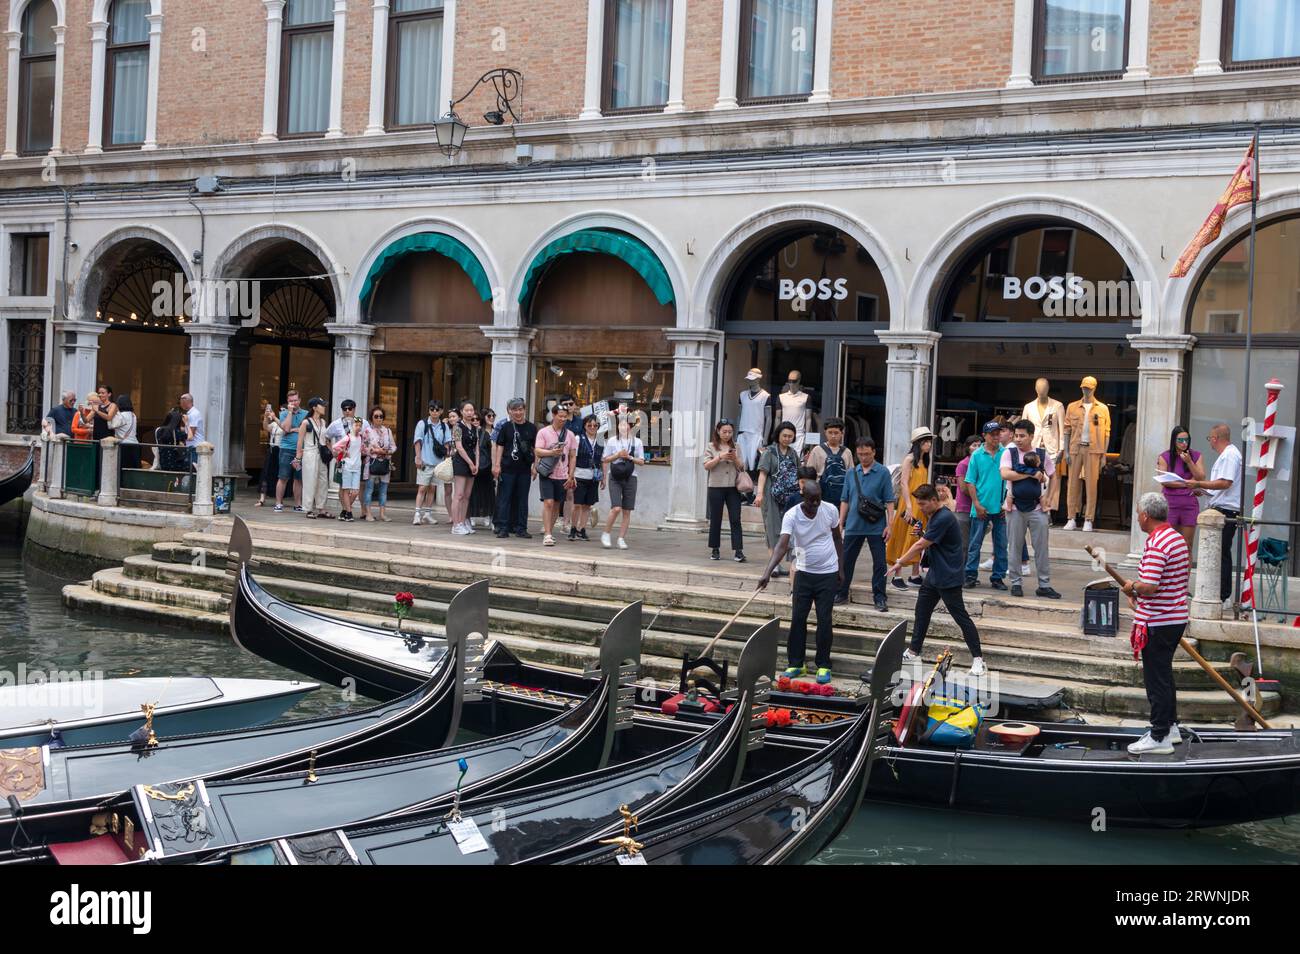 A queue of tourists wait to board their gondolas for a tour at one of the official gondola stations based on the canals of Venice in the Veneto region Stock Photo